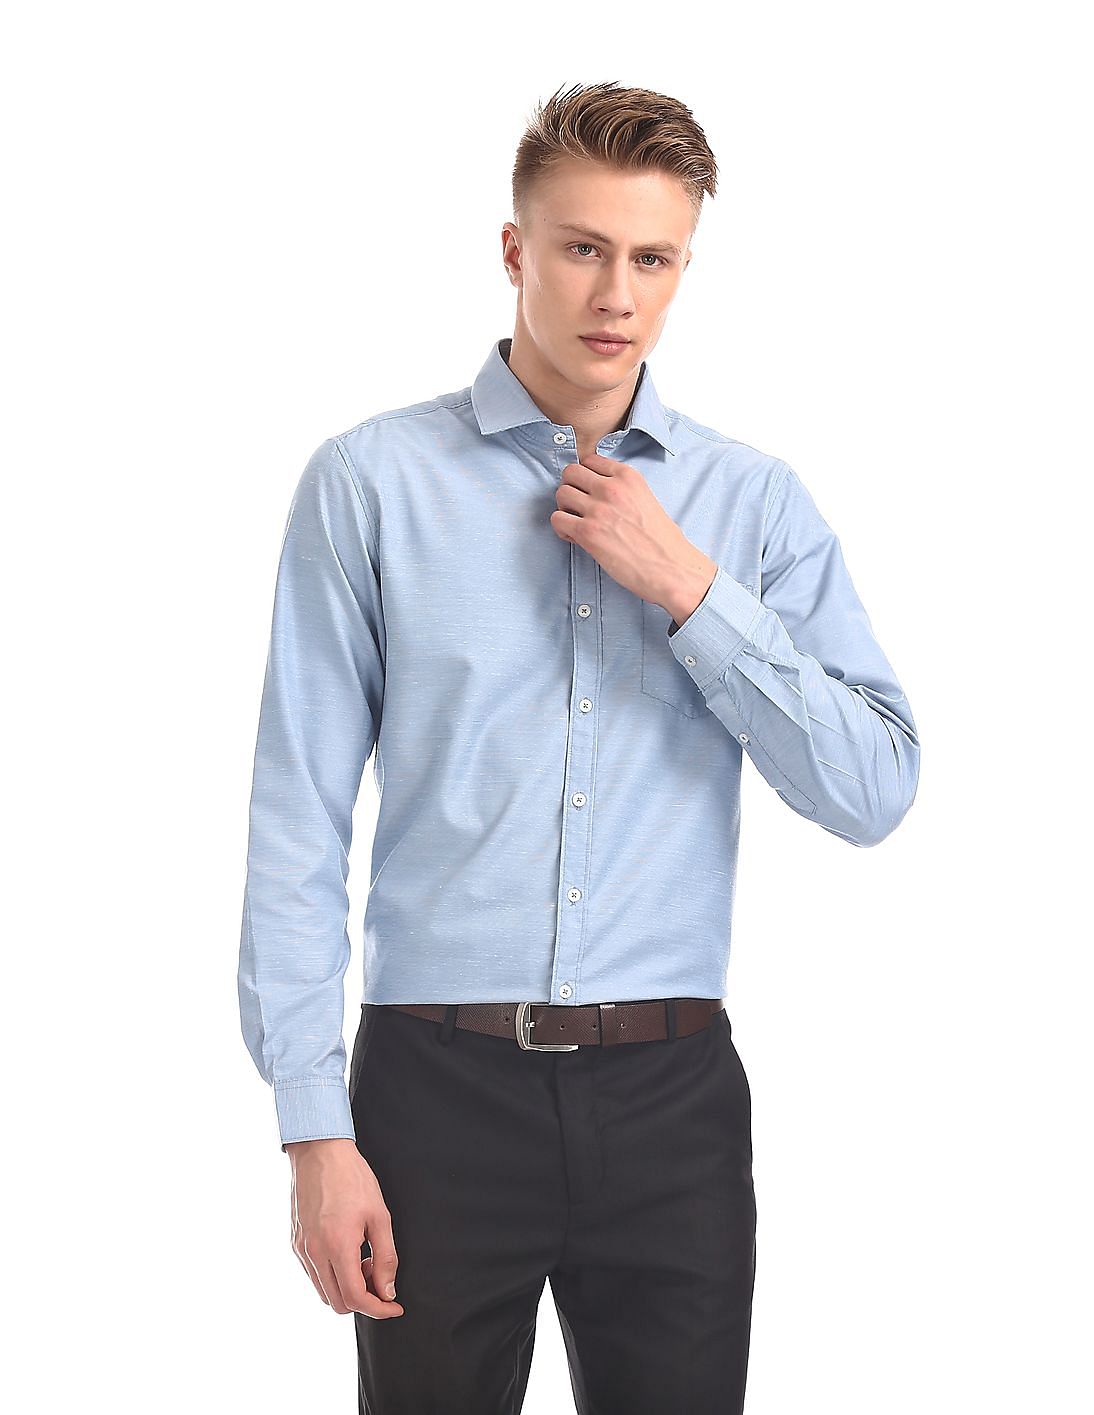 Buy Excalibur Mitered Cuff Patterned Shirt - NNNOW.com